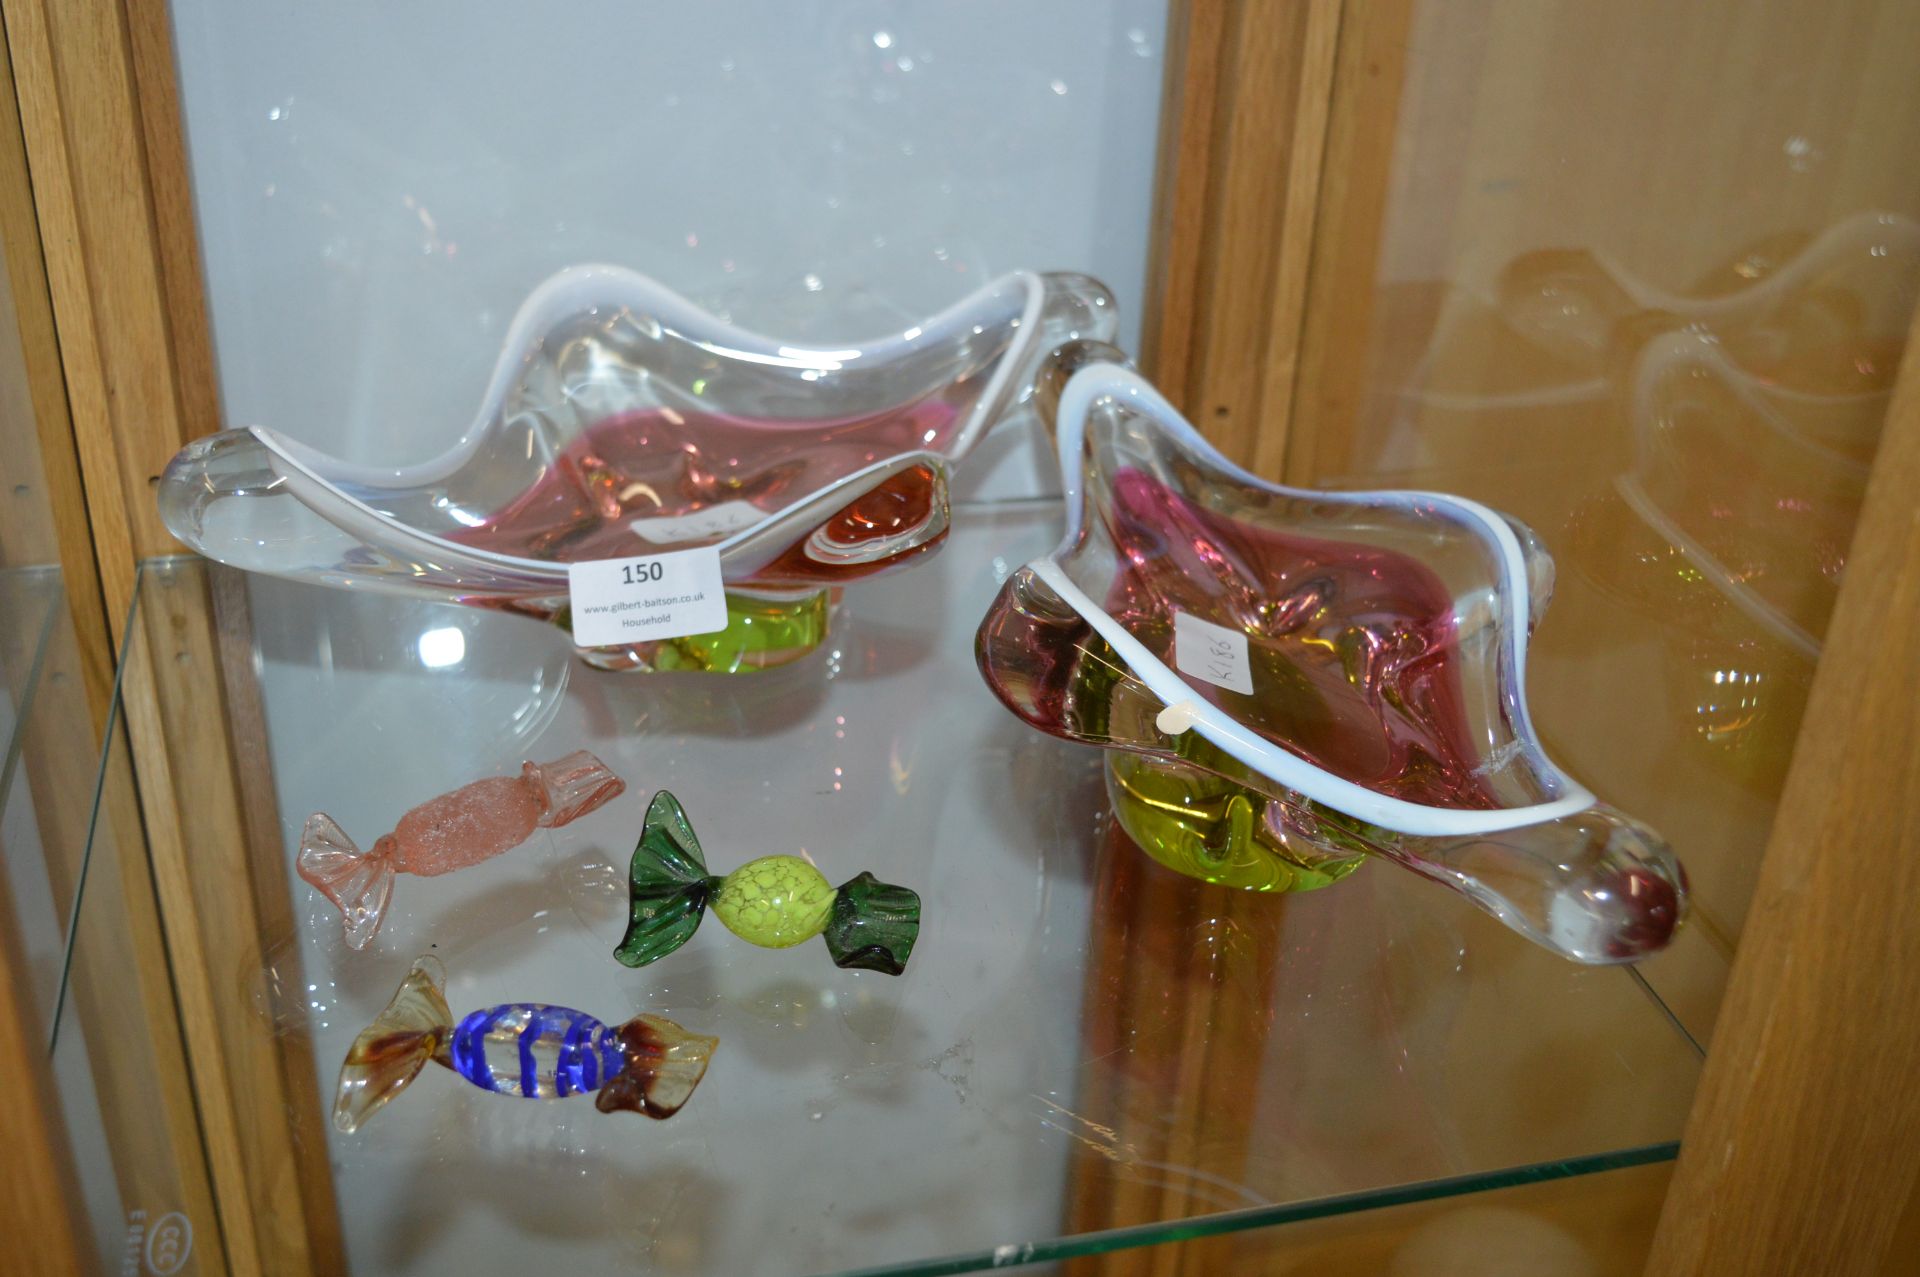 Murano Glass Dishes and Novelty Glass Sweets